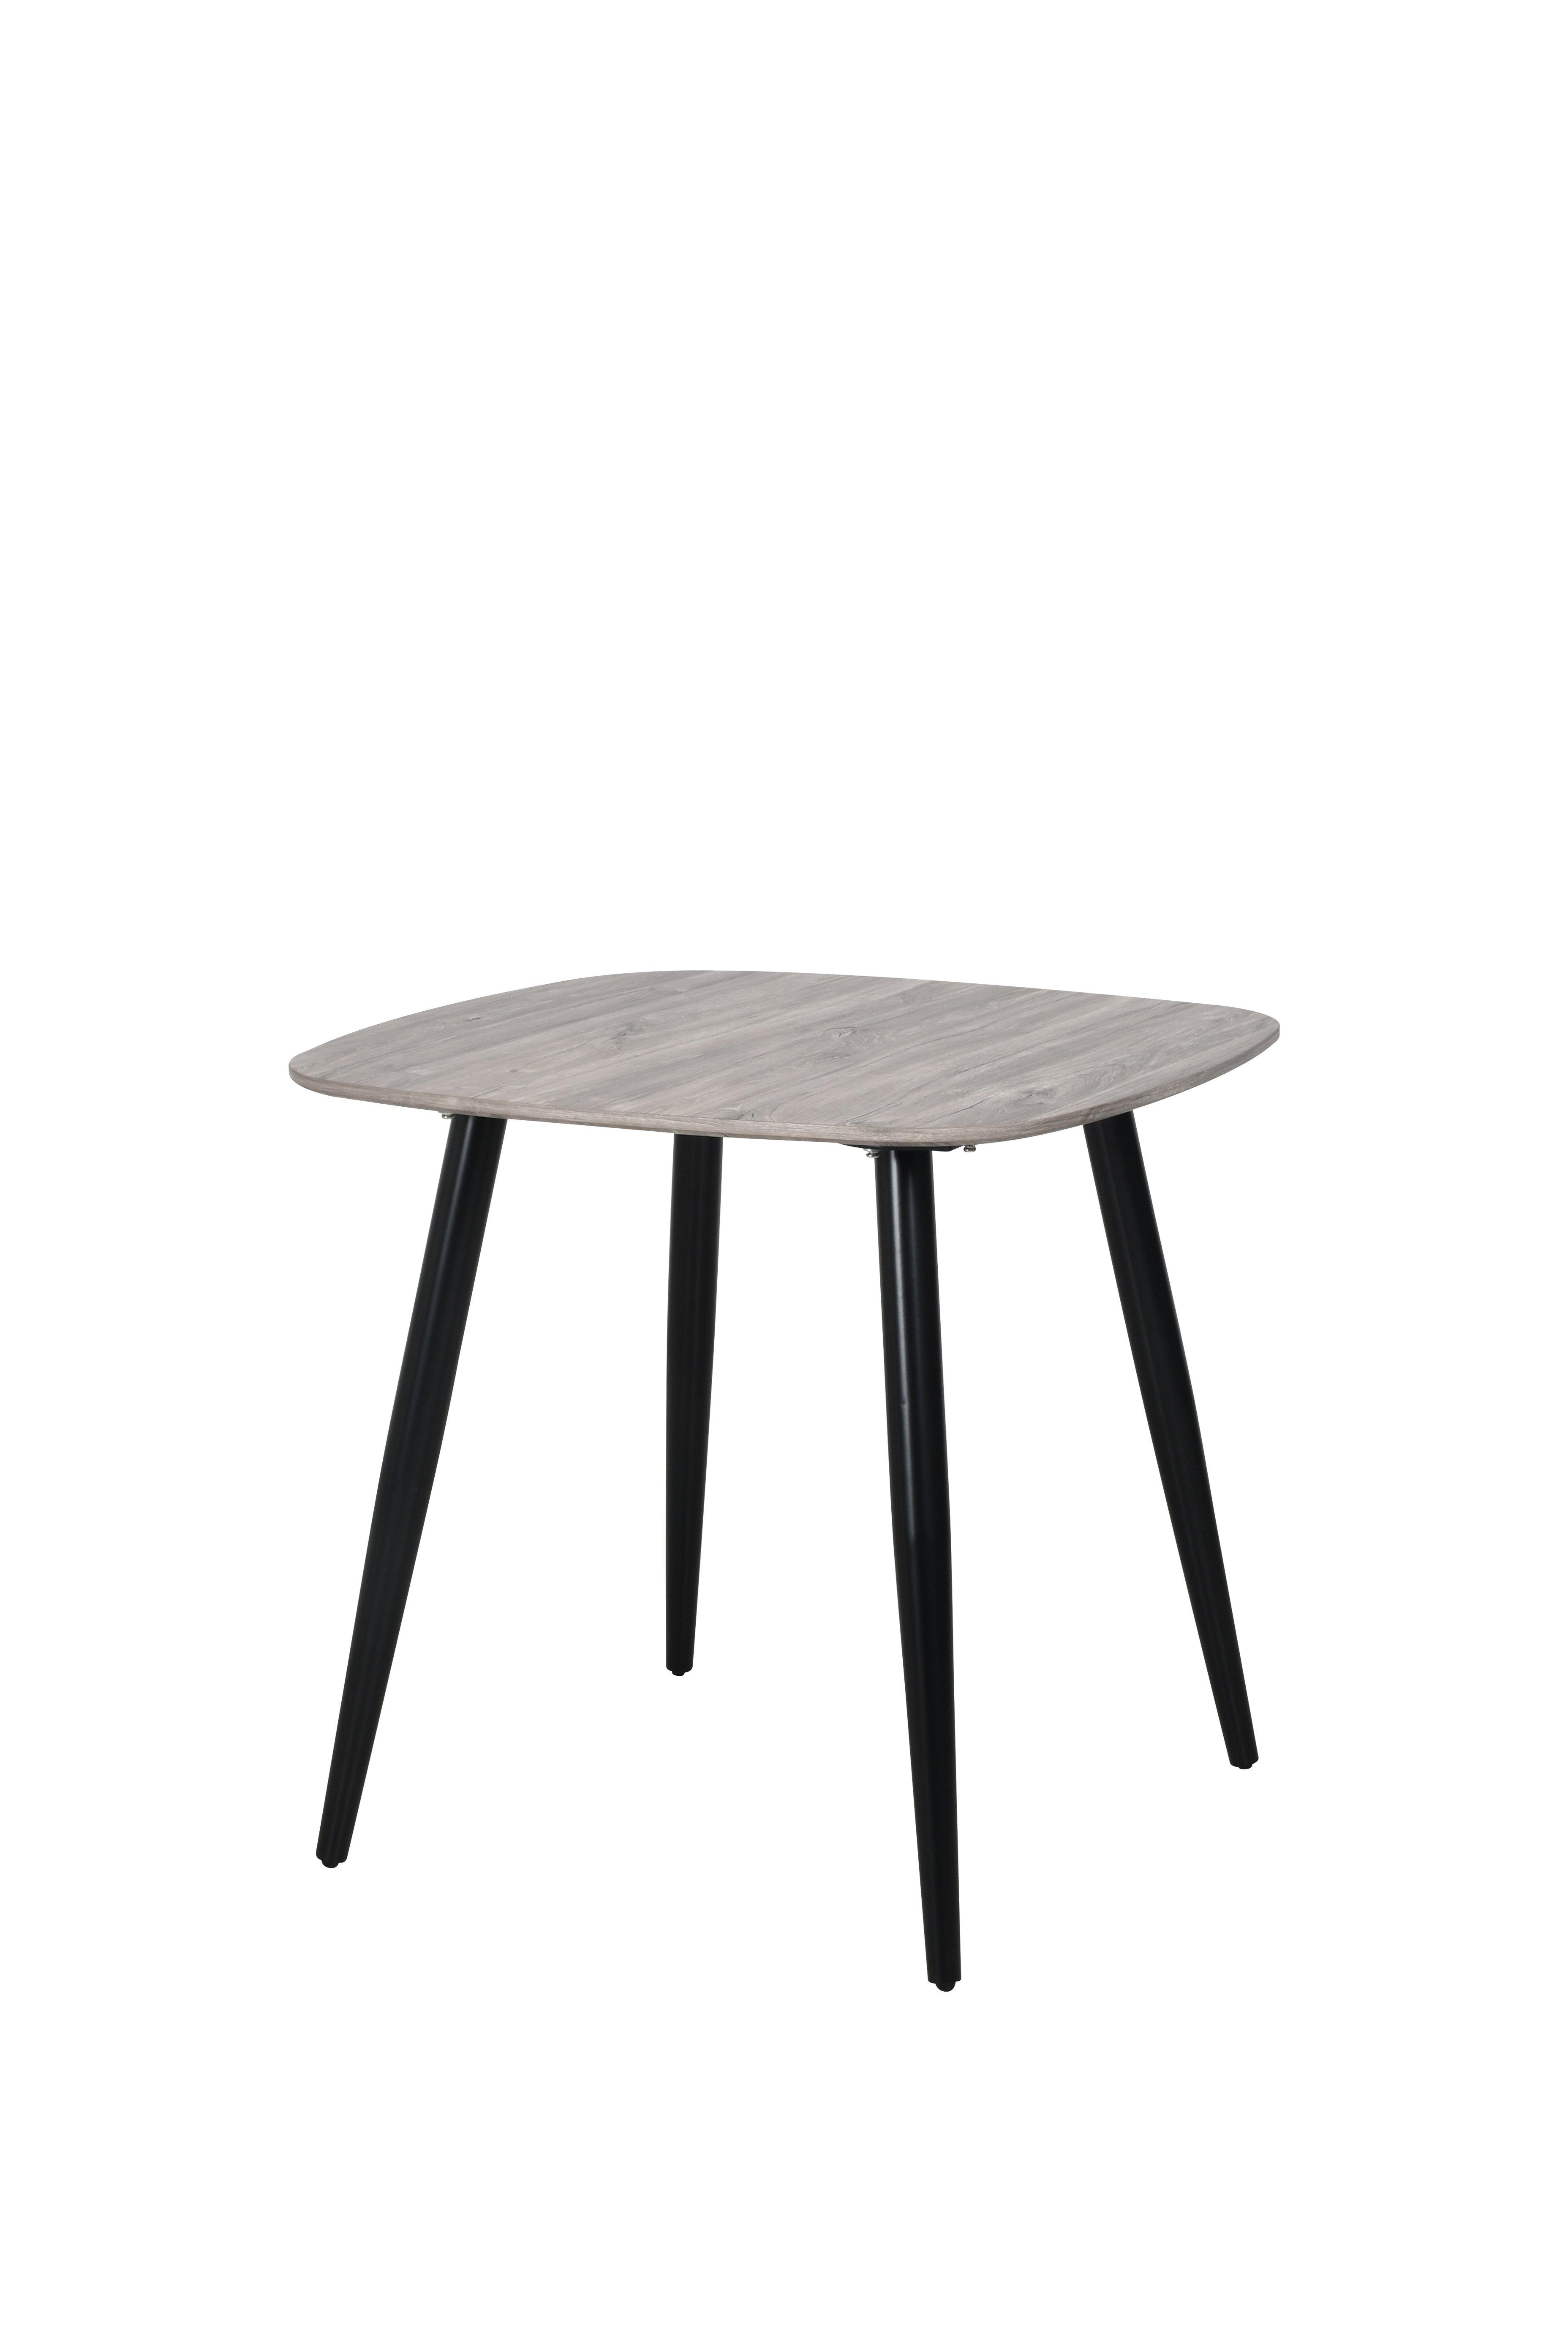 Aspen Square Dining Table With Black Tapered Legs